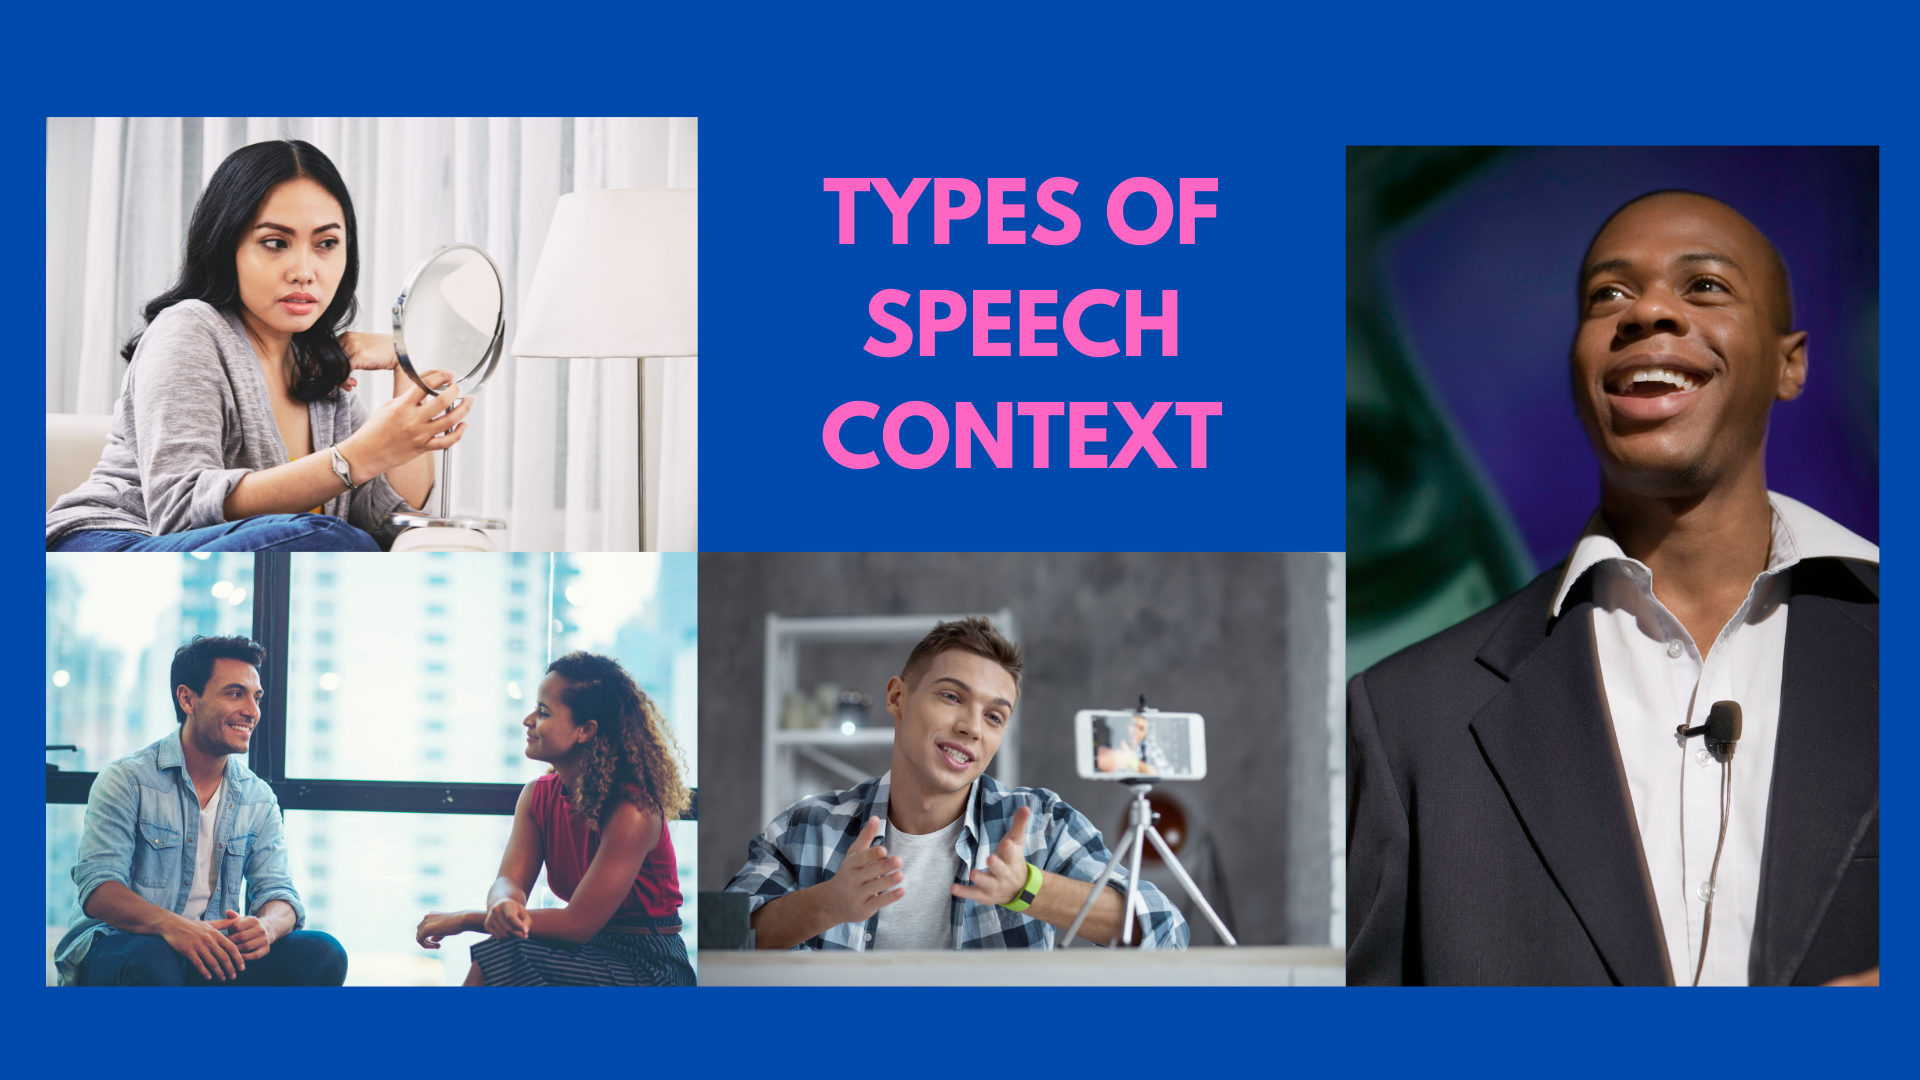 oral communication types of speech context